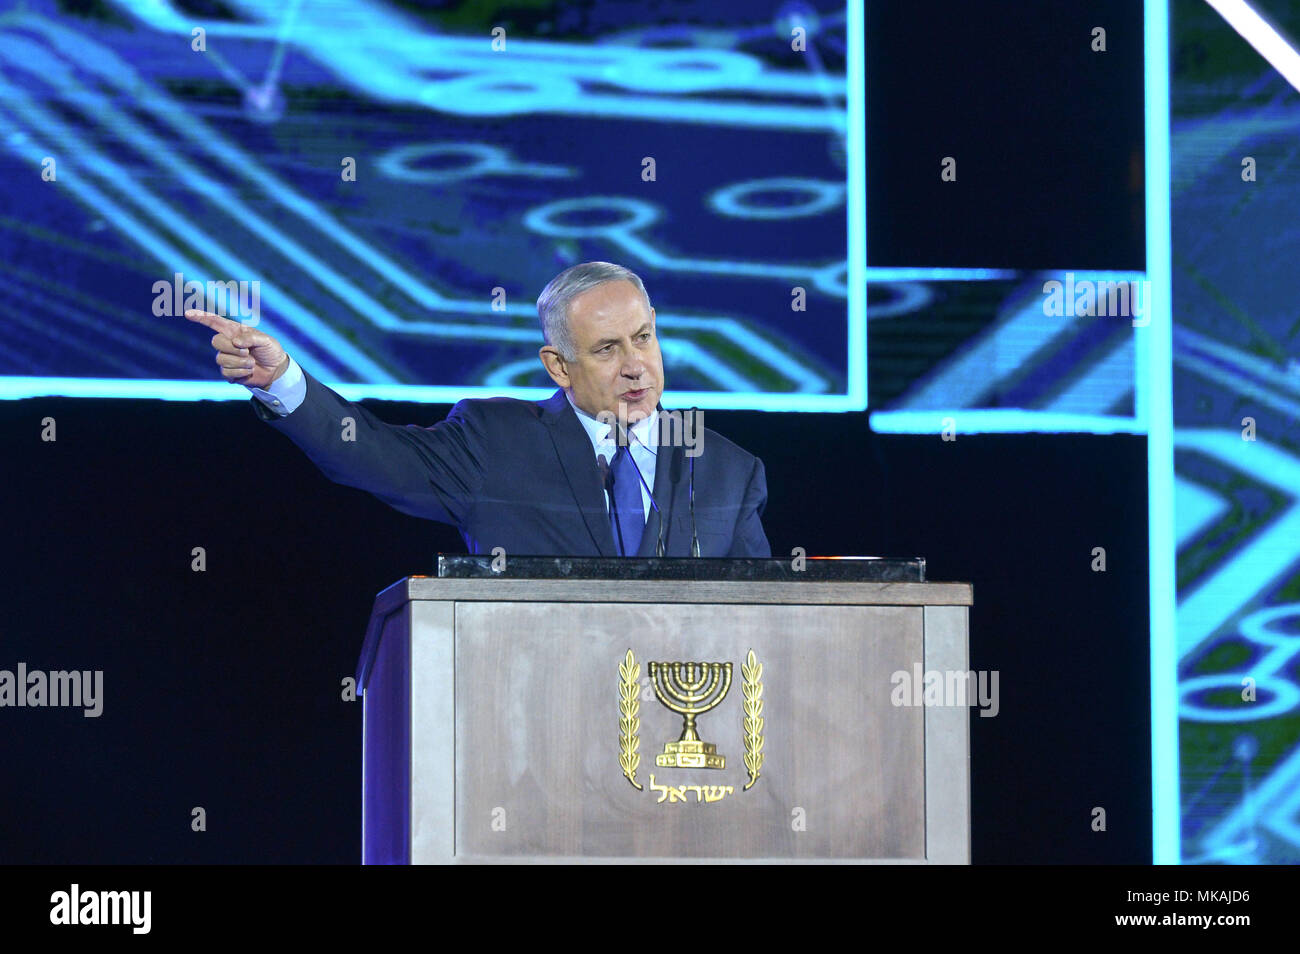 Latrun, Latrun. 7th May, 2018. Israeli Prime Minister Benjamin Netanyahu speaks during the ceremony marking the 70th anniversary of Israel Defense Forces (IDF), in Latrun, on May 7, 2018. Credit: JINI/Xinhua/Alamy Live News Stock Photo